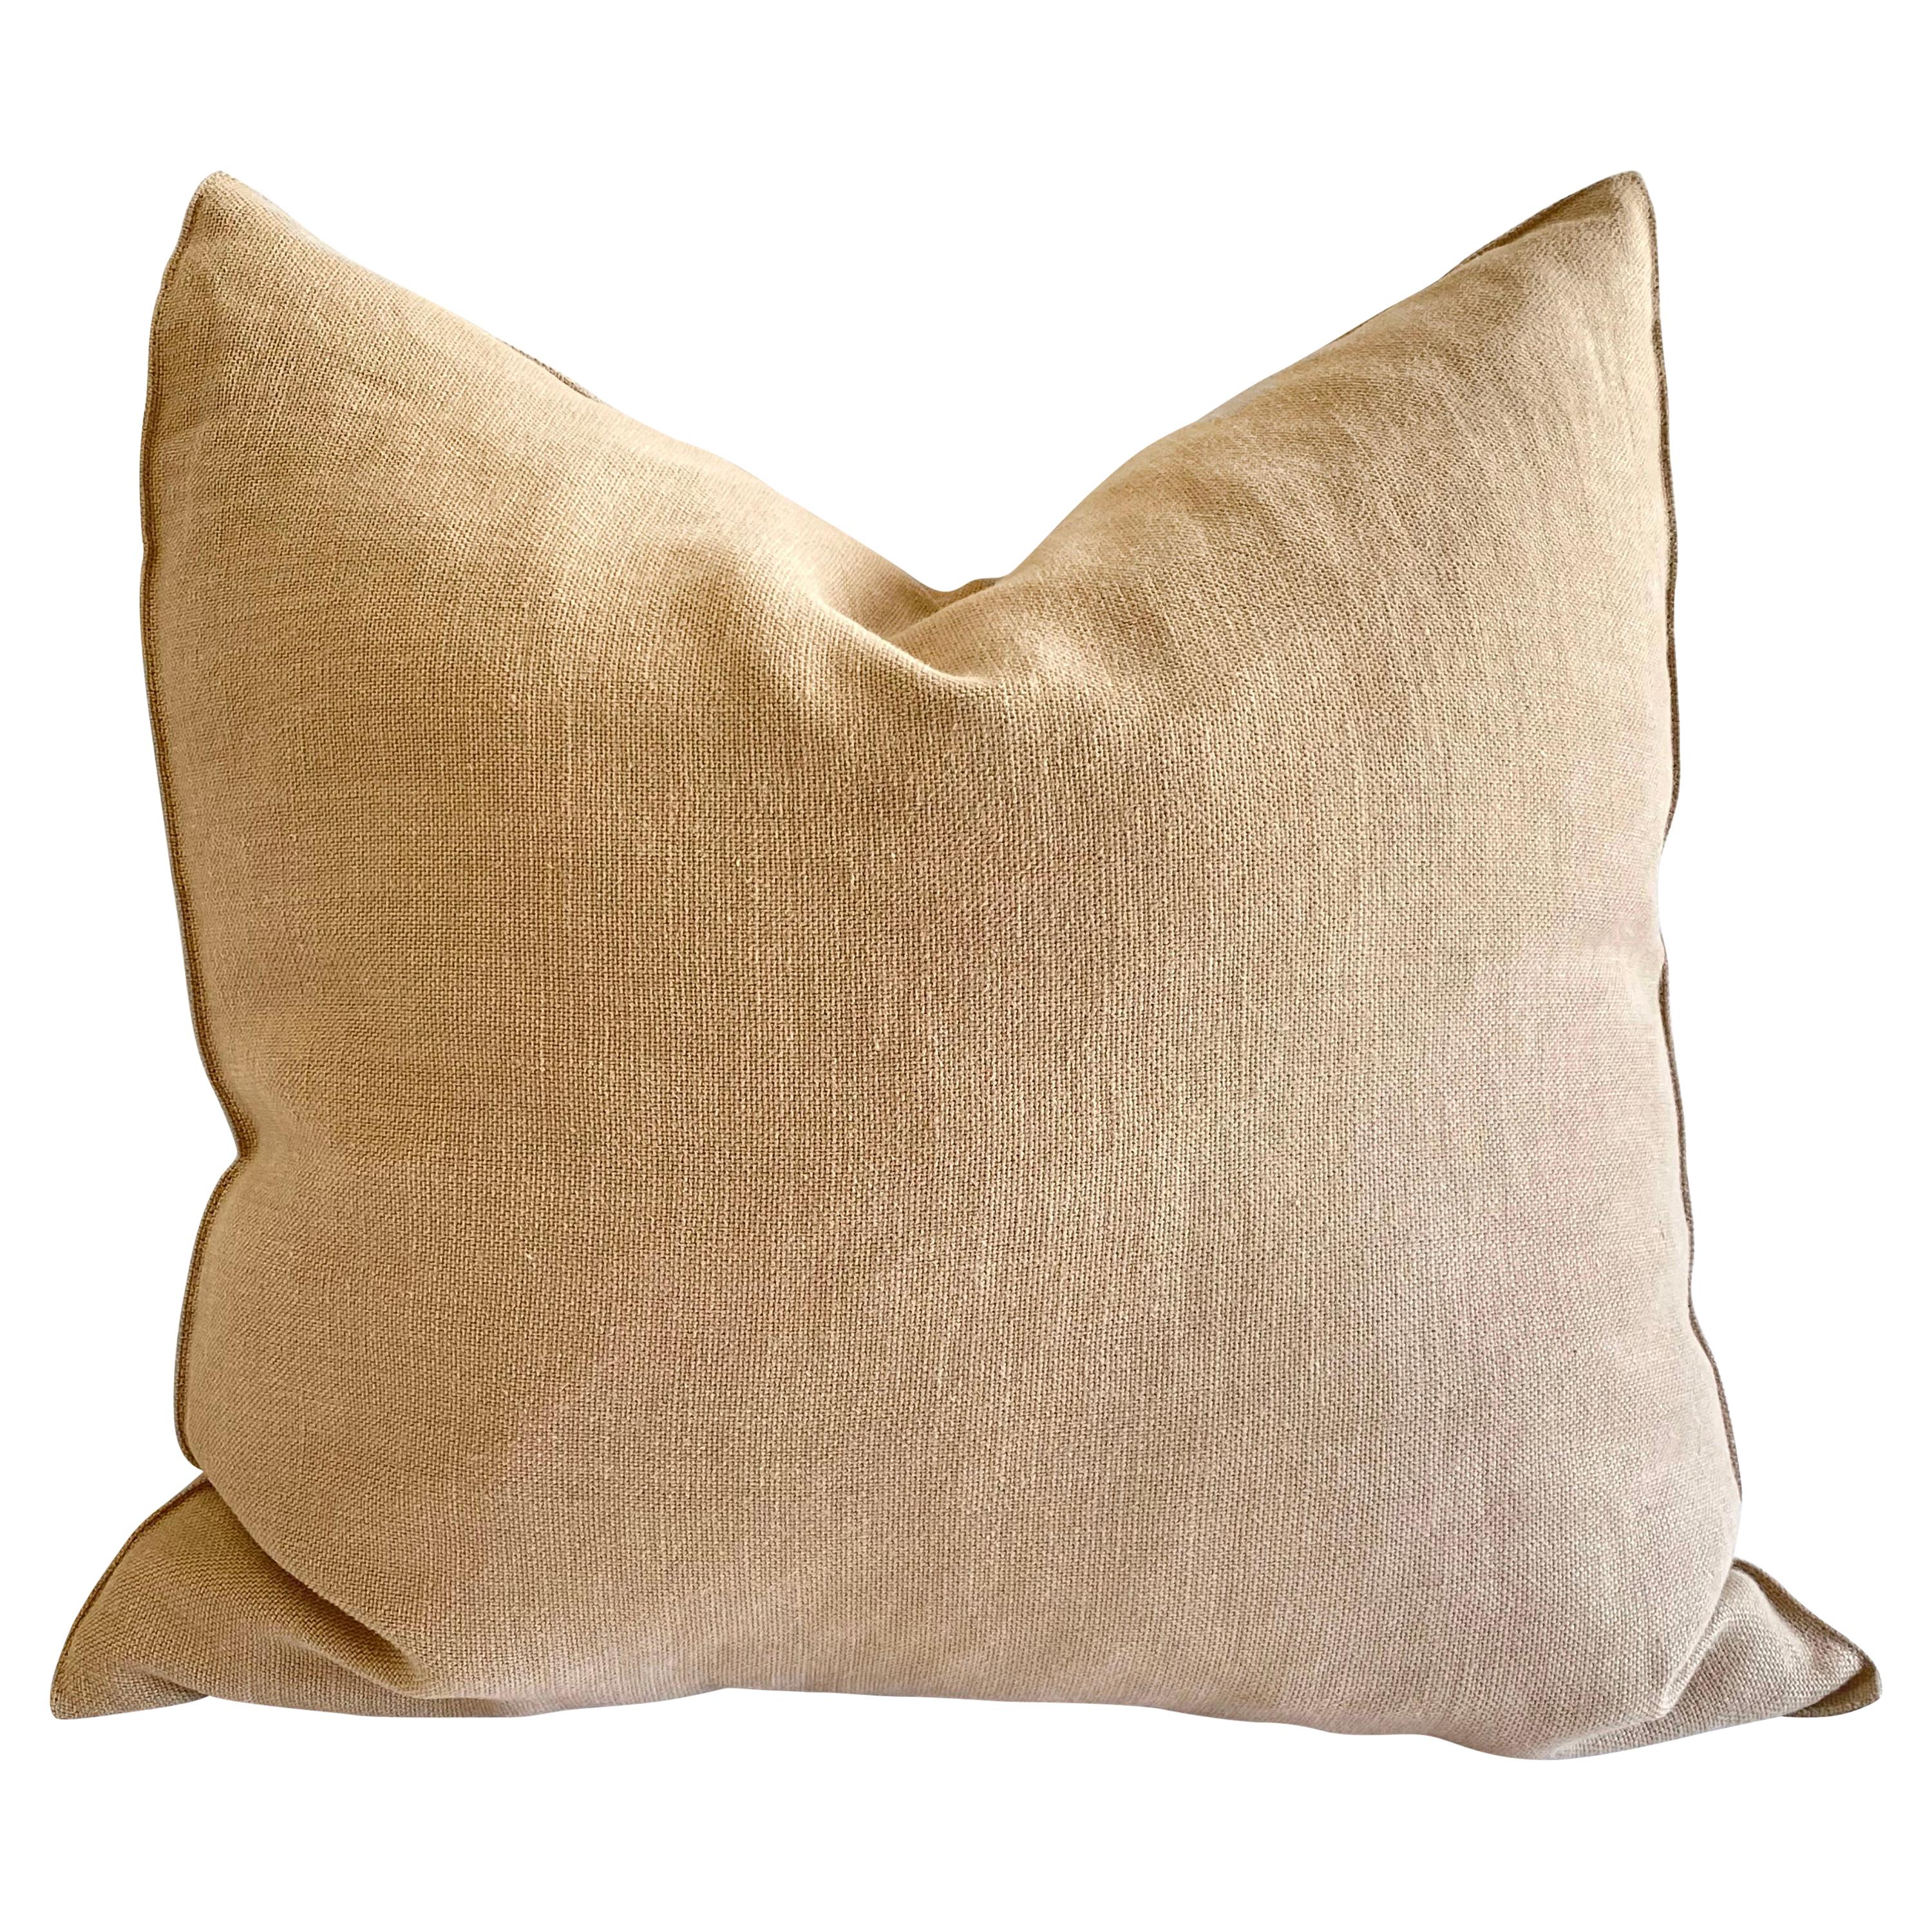 Belgian Linen Accent Pillow Cover in Nude Apricot Color